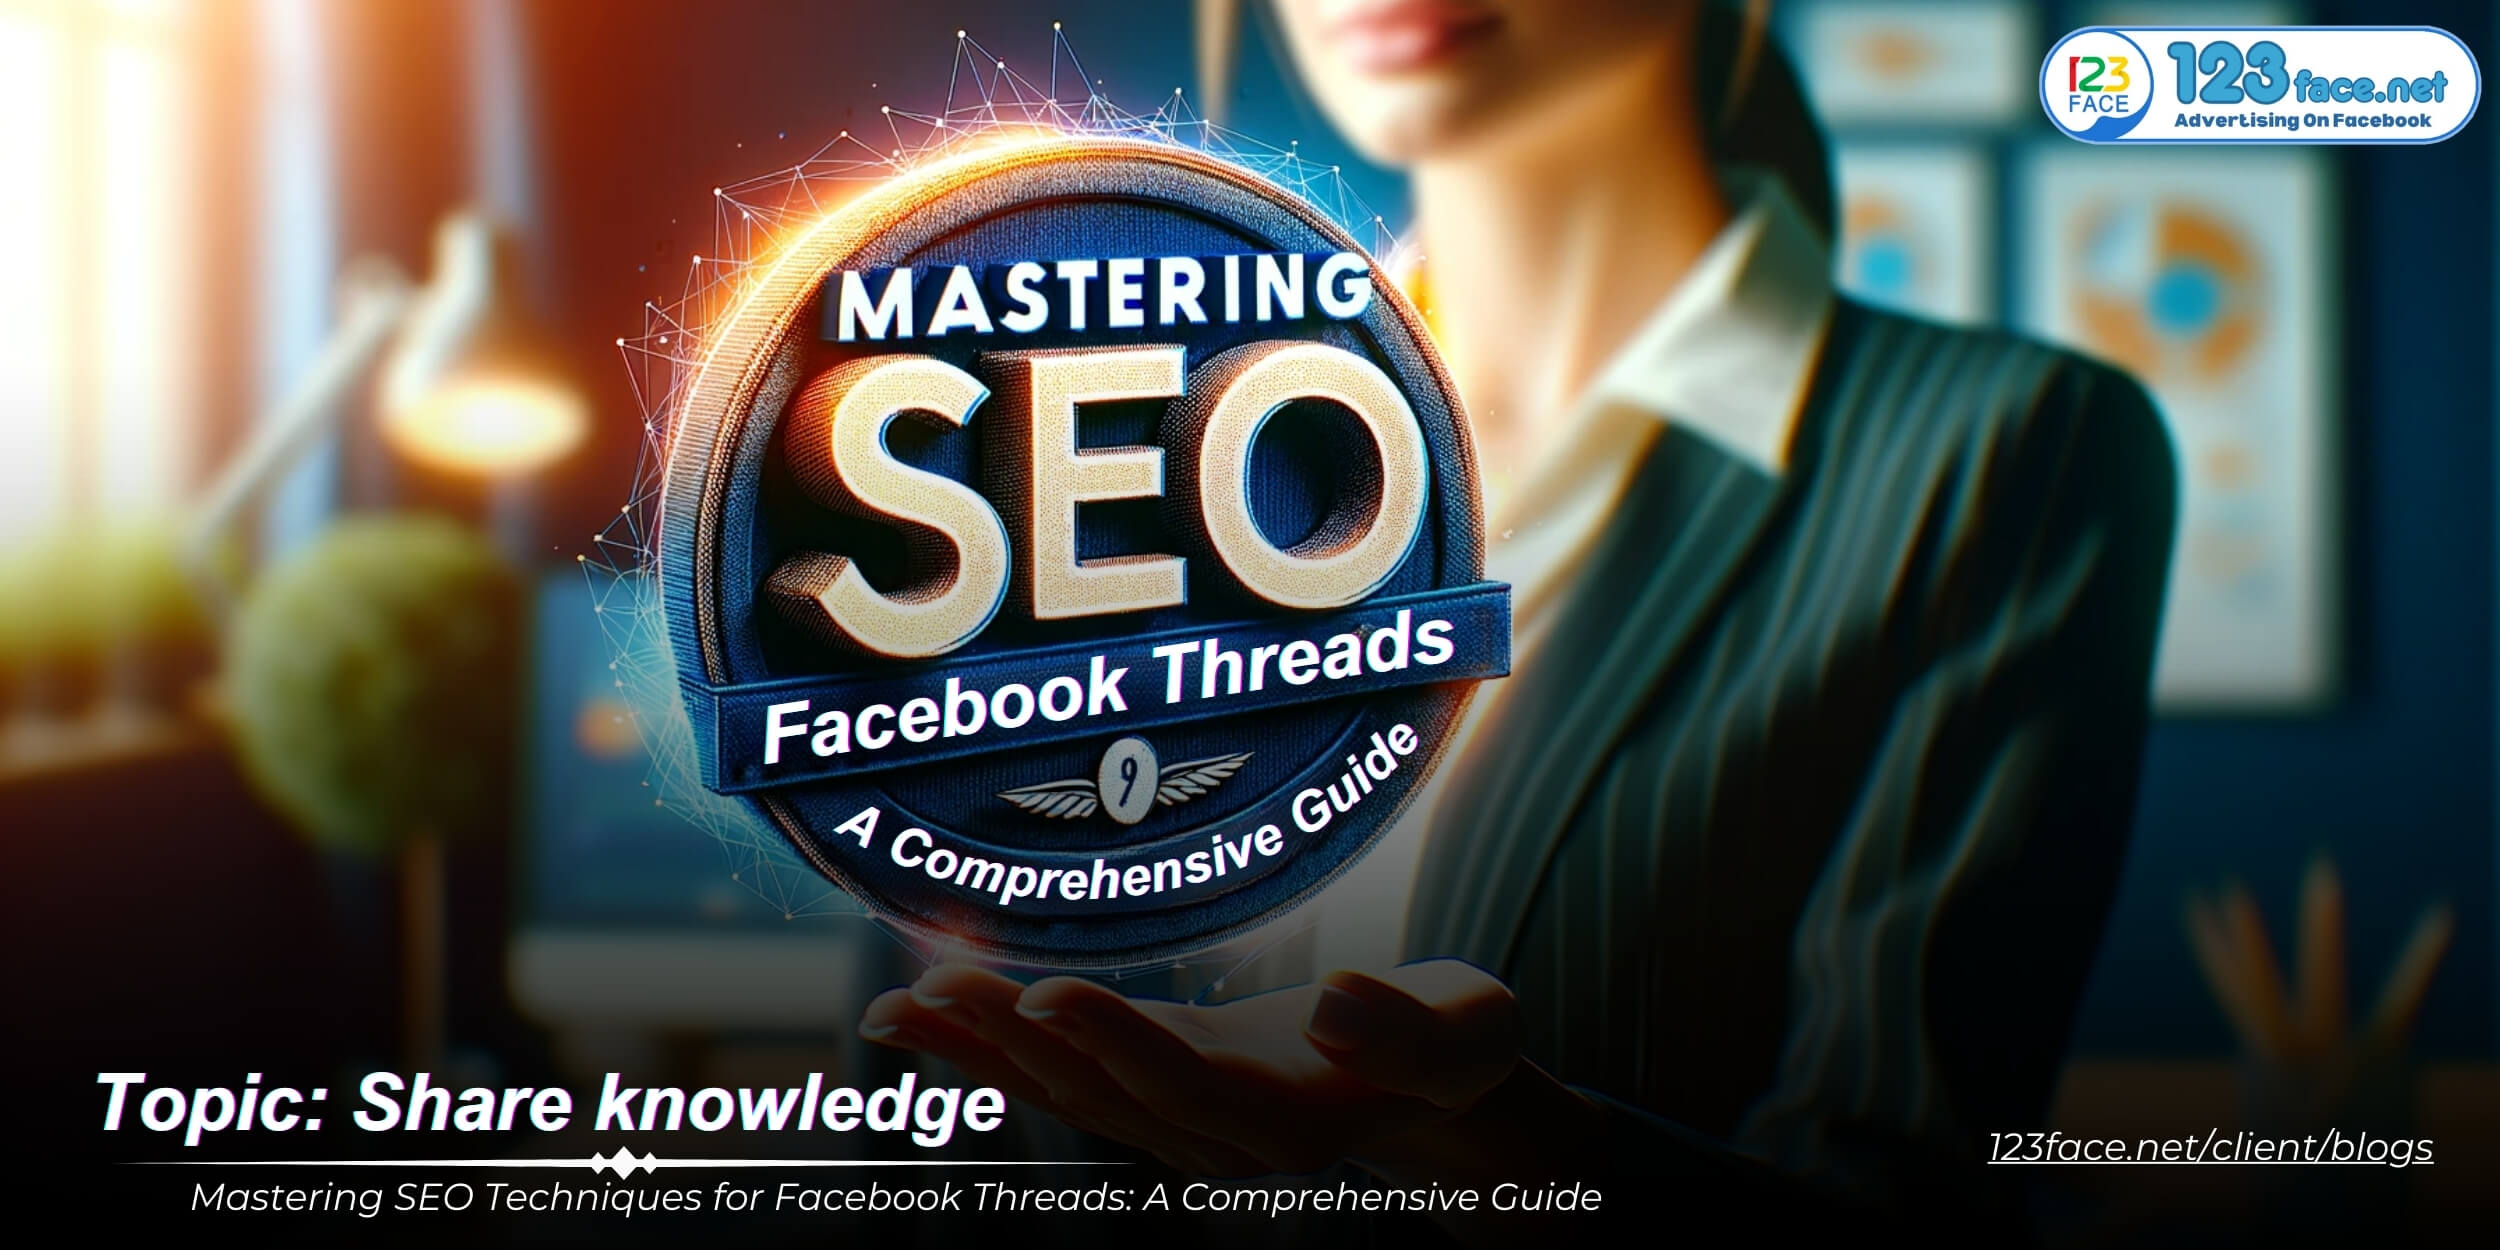 Mastering SEO Techniques for Facebook Threads: A Comprehensive Guide